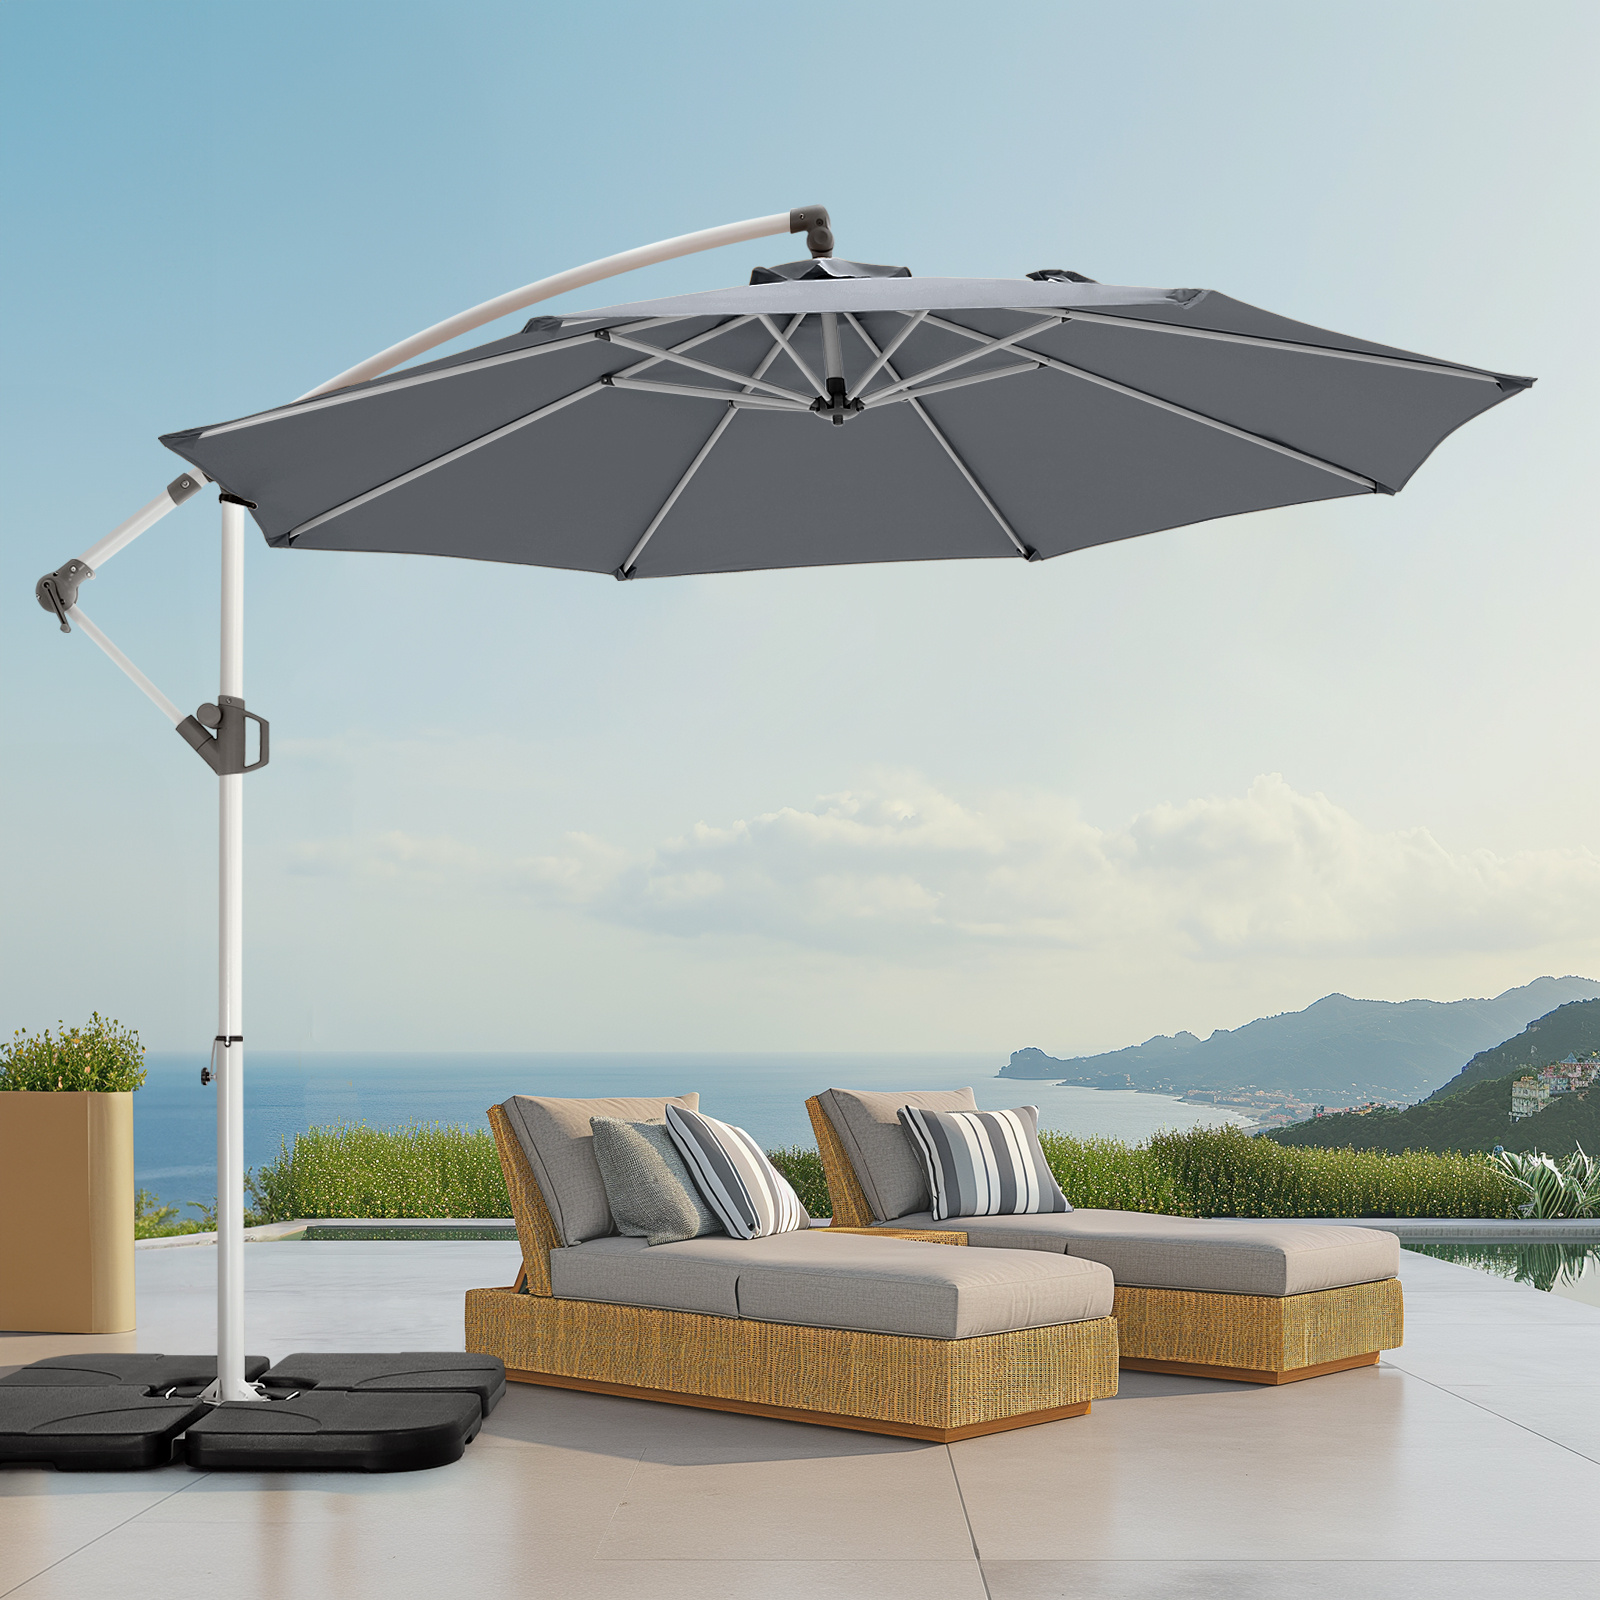 

10ft Offset Patio Umbrella - Hanging Cantilever Outdoor Market Umbrella, 5-year Fade Resistant Upf50 Uv Protection With Easy Tilt Adjustment And Crank (beige)